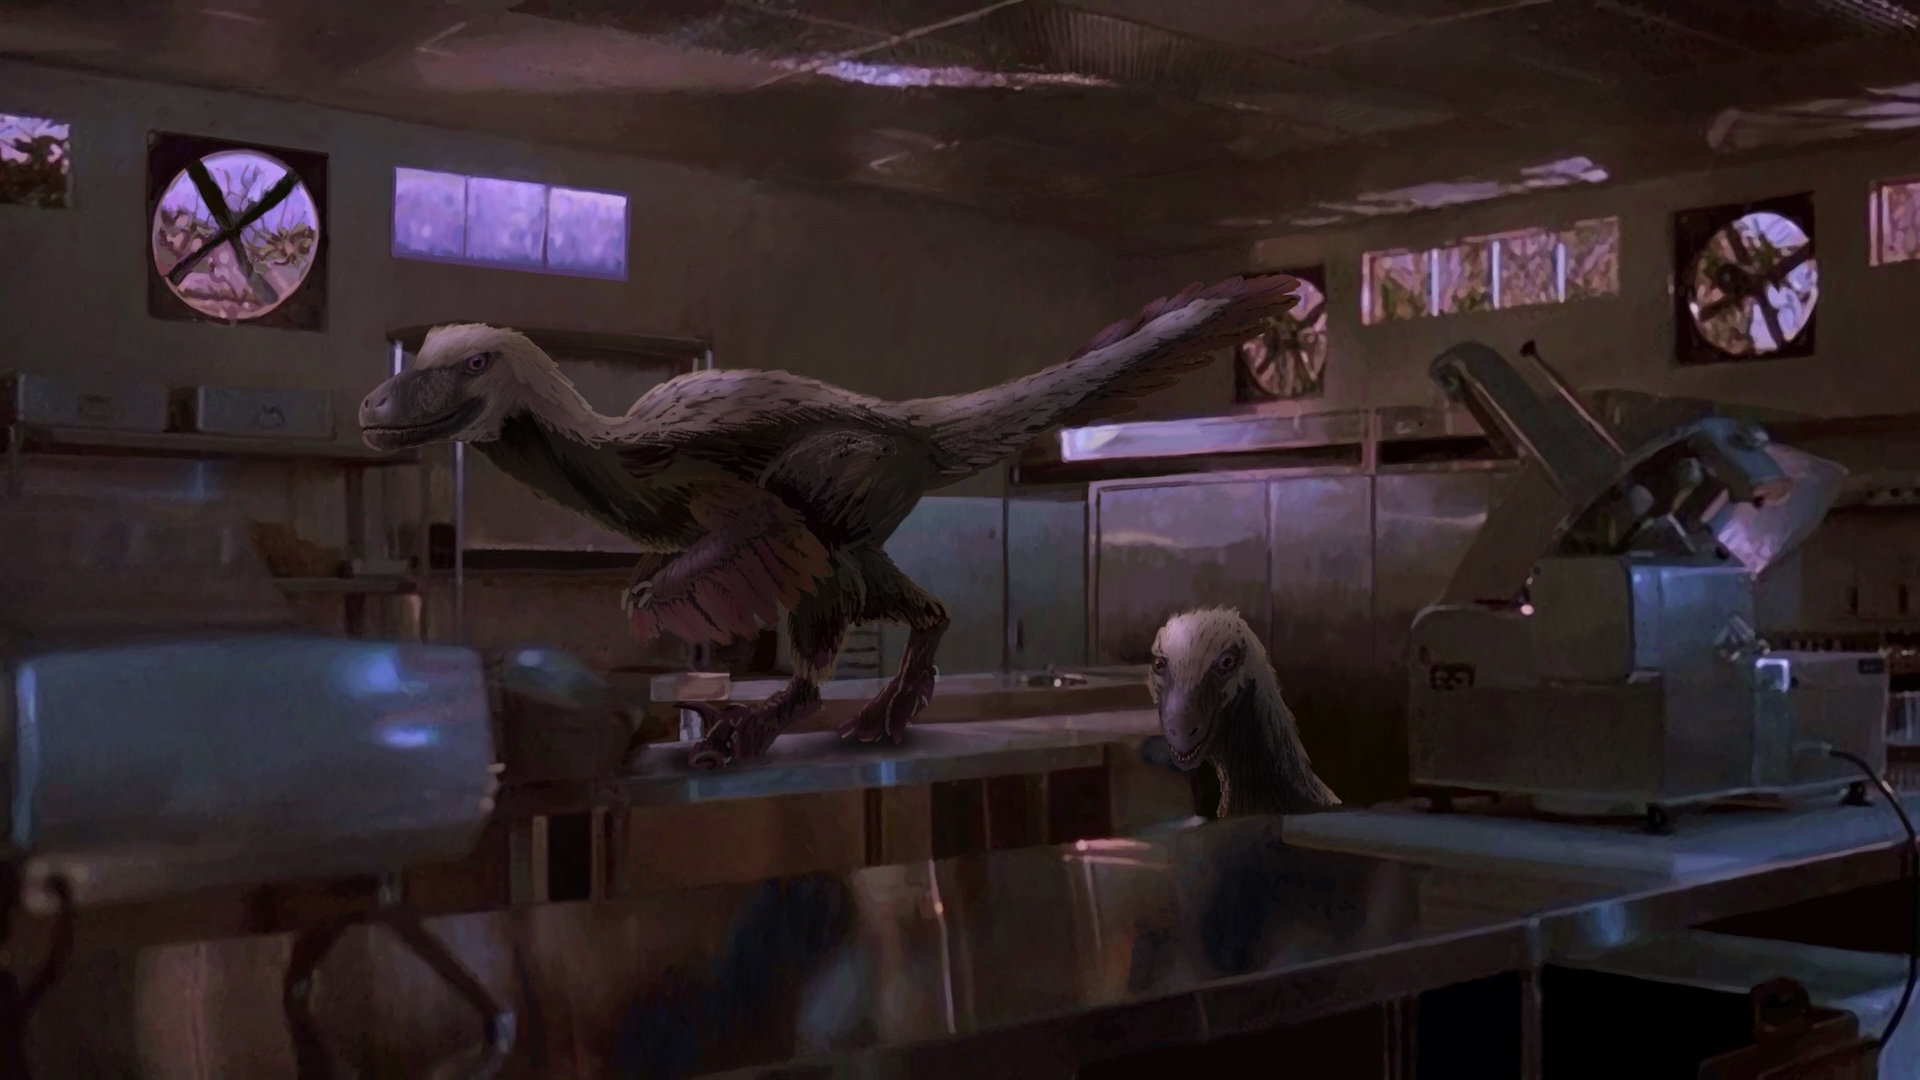 Digitally painted reproduction of of a frame from Jurassic Park, but instead of movie monster velociraptors in the kitchen, it's smaller, fully feathered ones.'